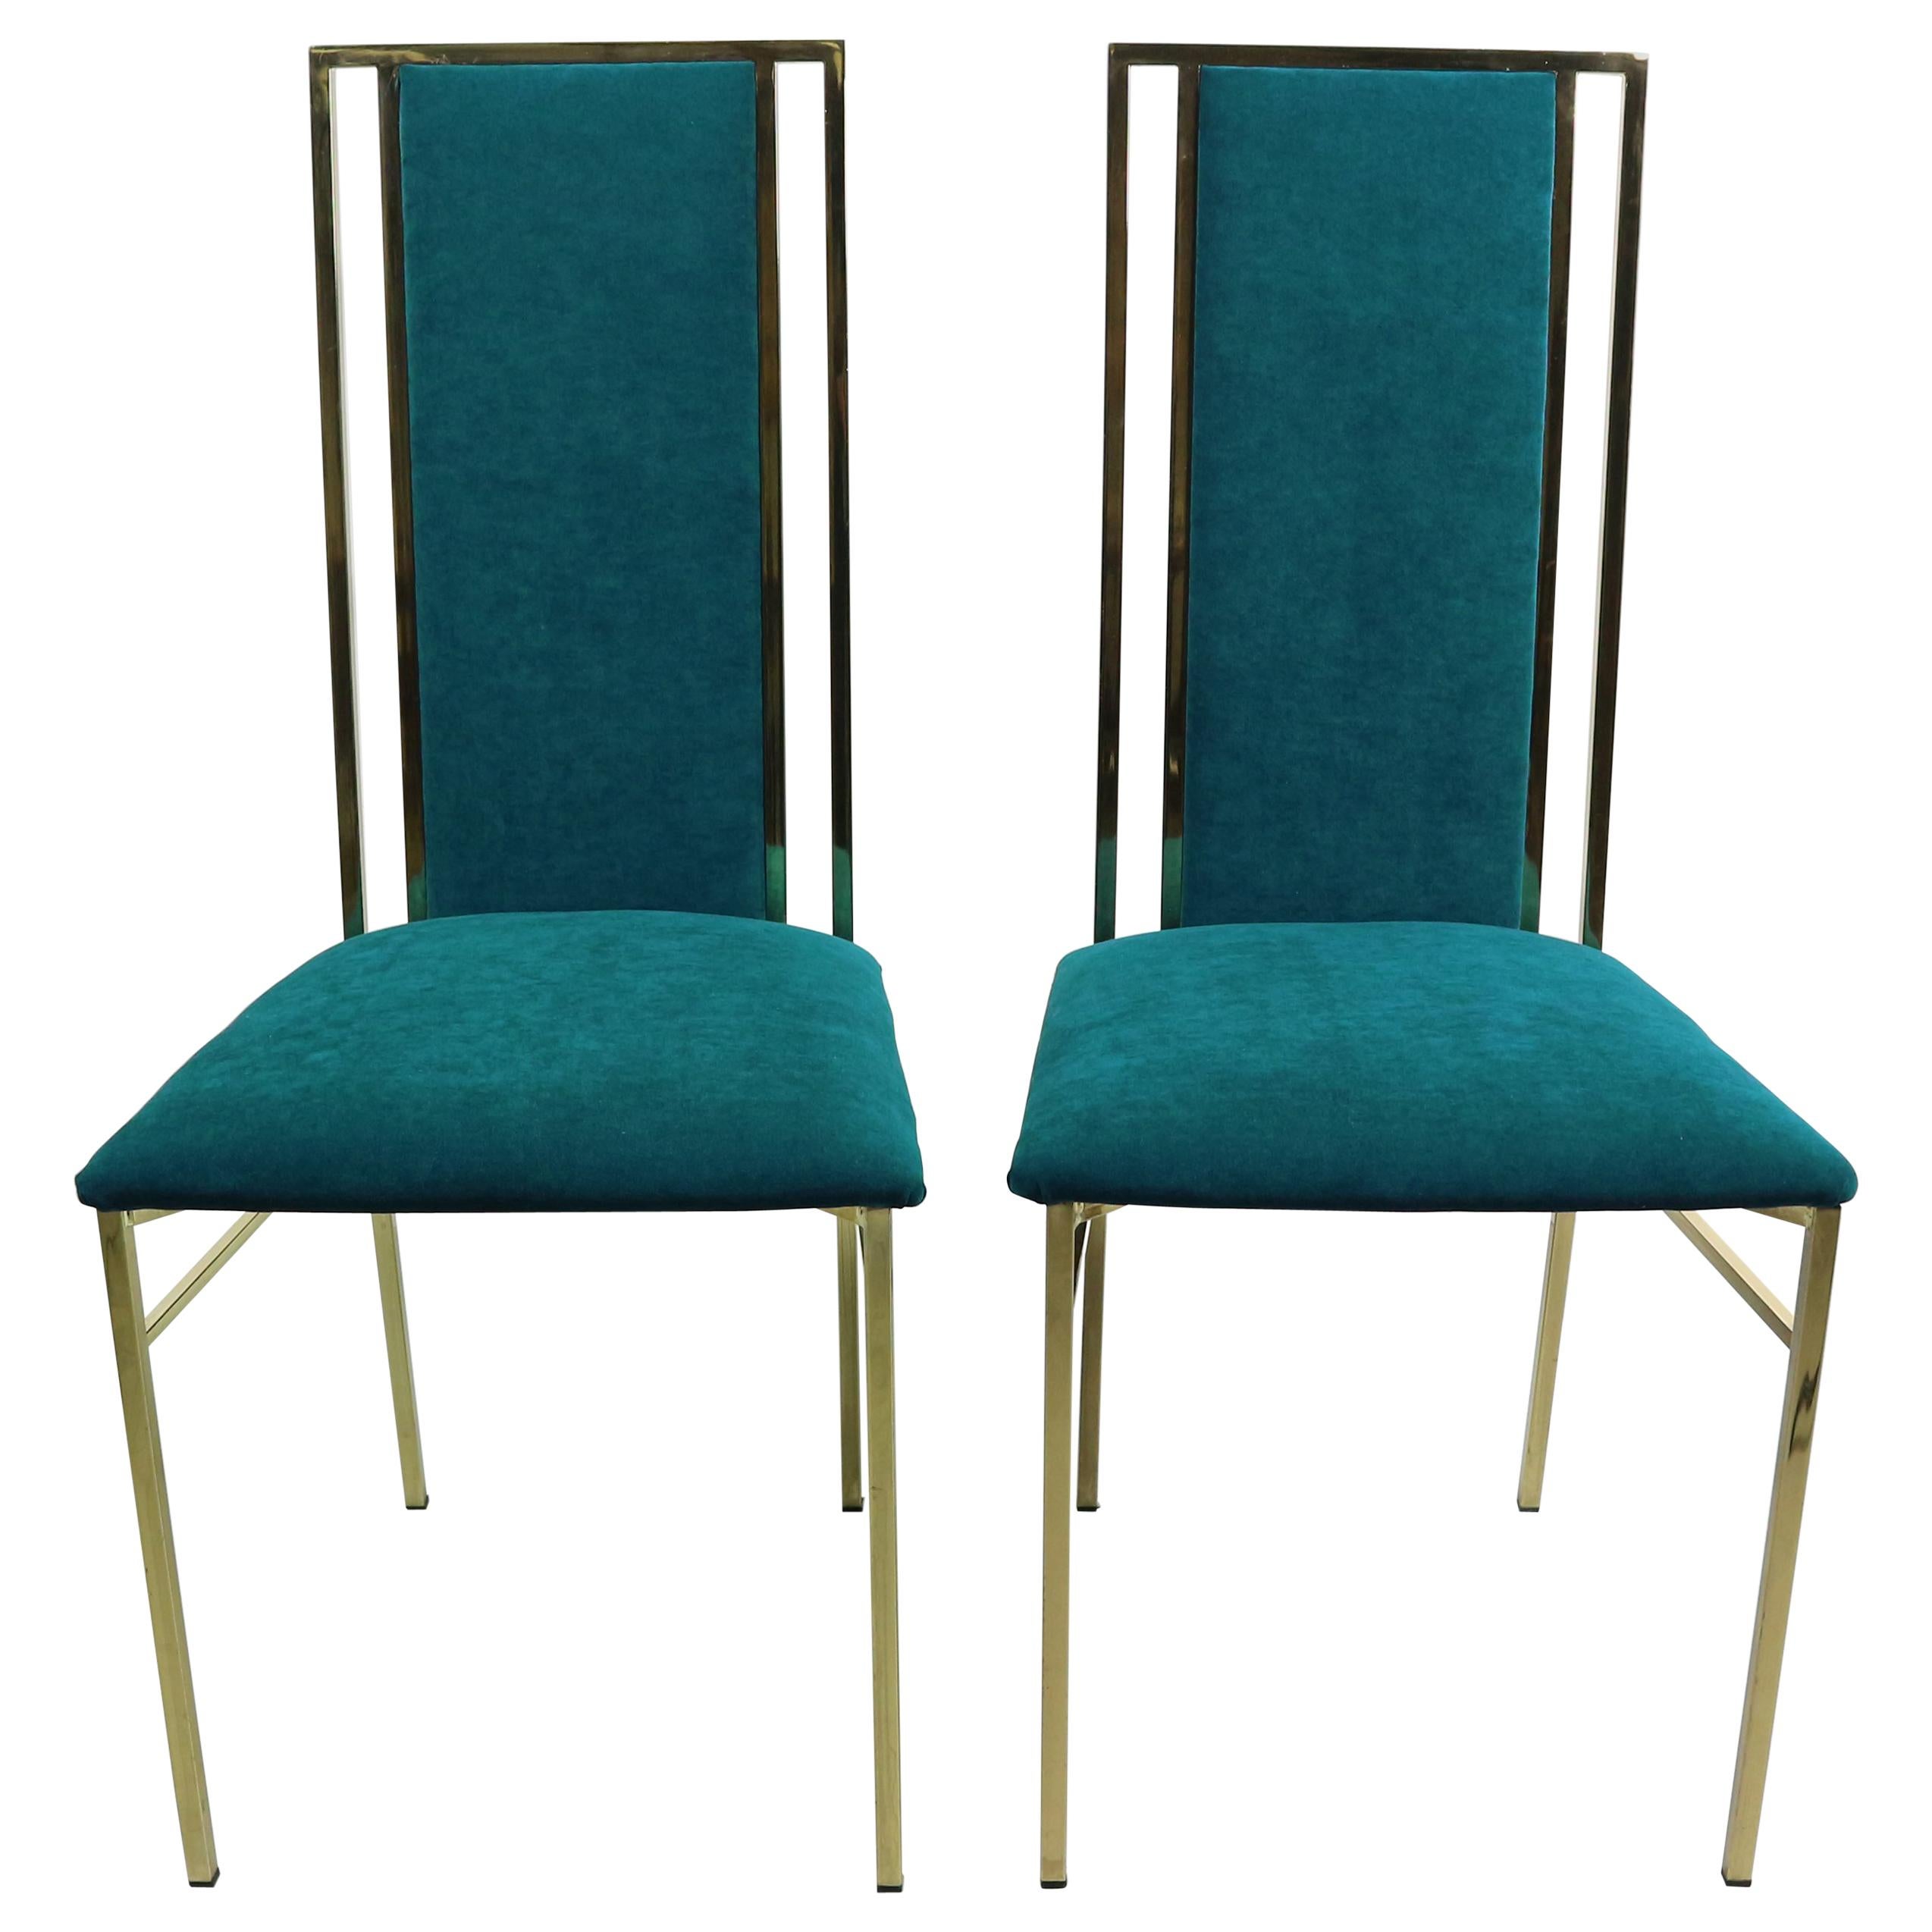 These Italian polished brass framed dining chairs are attributed to Romeo Rega.
The mixed metal framing adds a modern note to the chairs' appearance.
The chairs has been newly upholstered in blue/green velvet.
      